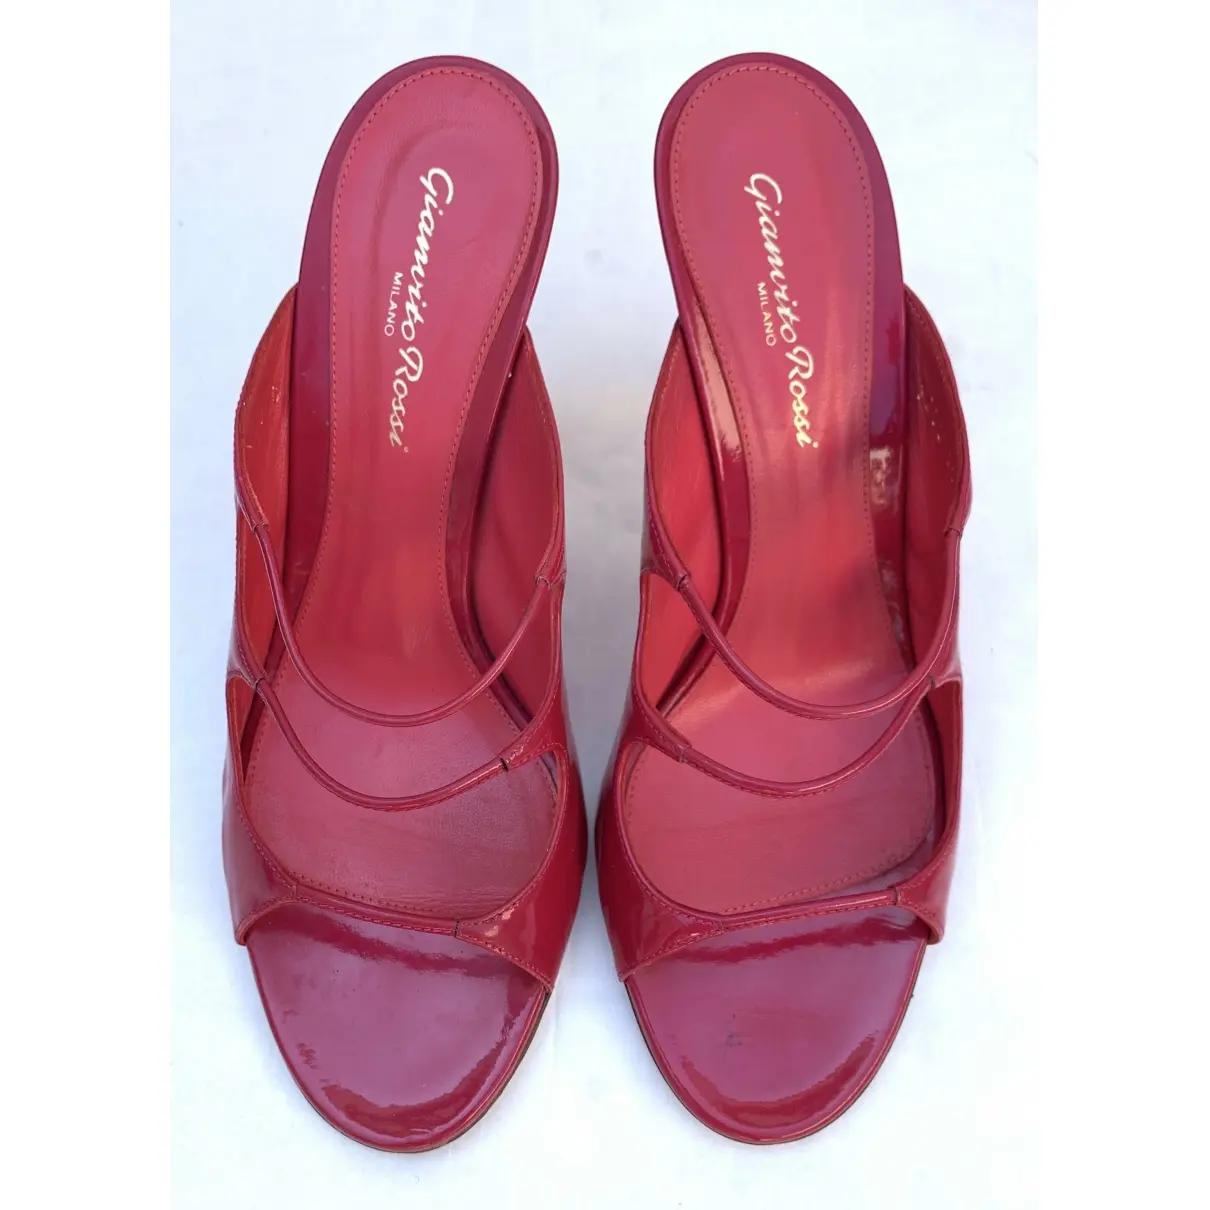 Buy Gianvito Rossi Patent leather mules online